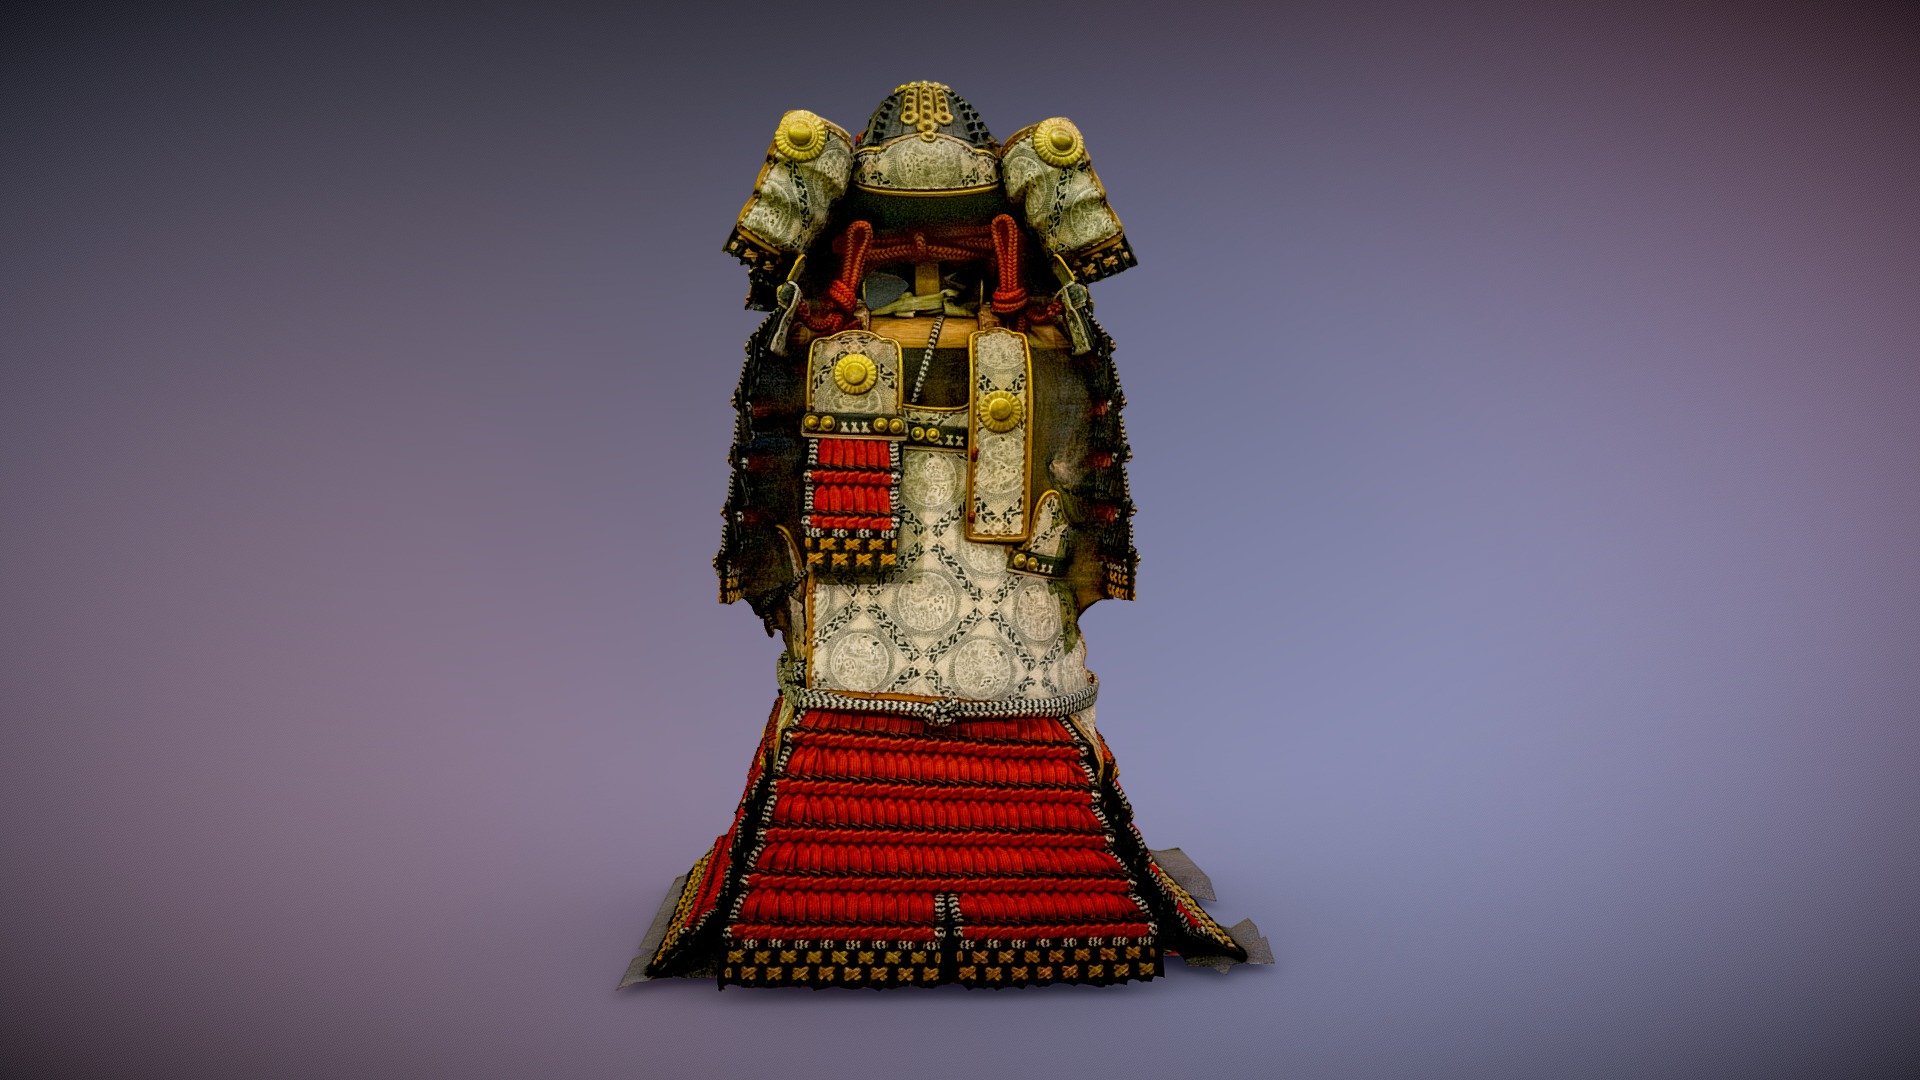 Armor replica made in 1937 from a 12th armor at the Mushashi Mitake Shrine Tokyo - Ō-yoroi Samurai Armor photogrammetry scan - 3D model by Miguel Bandera (@miguelbandera) 3d model